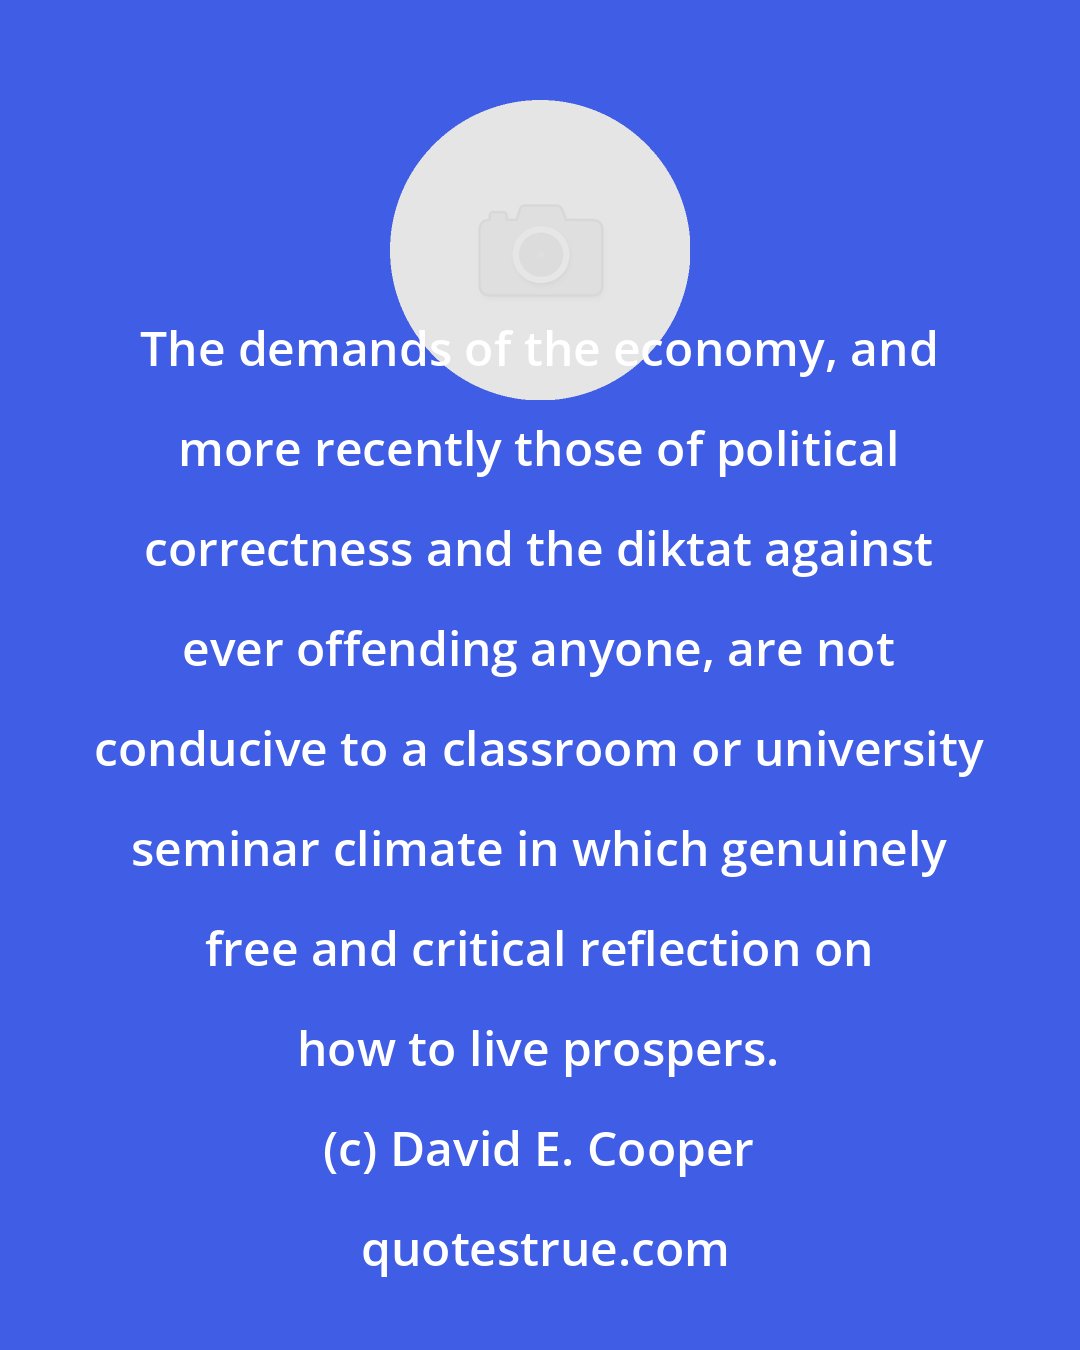 David E. Cooper: The demands of the economy, and more recently those of political correctness and the diktat against ever offending anyone, are not conducive to a classroom or university seminar climate in which genuinely free and critical reflection on how to live prospers.